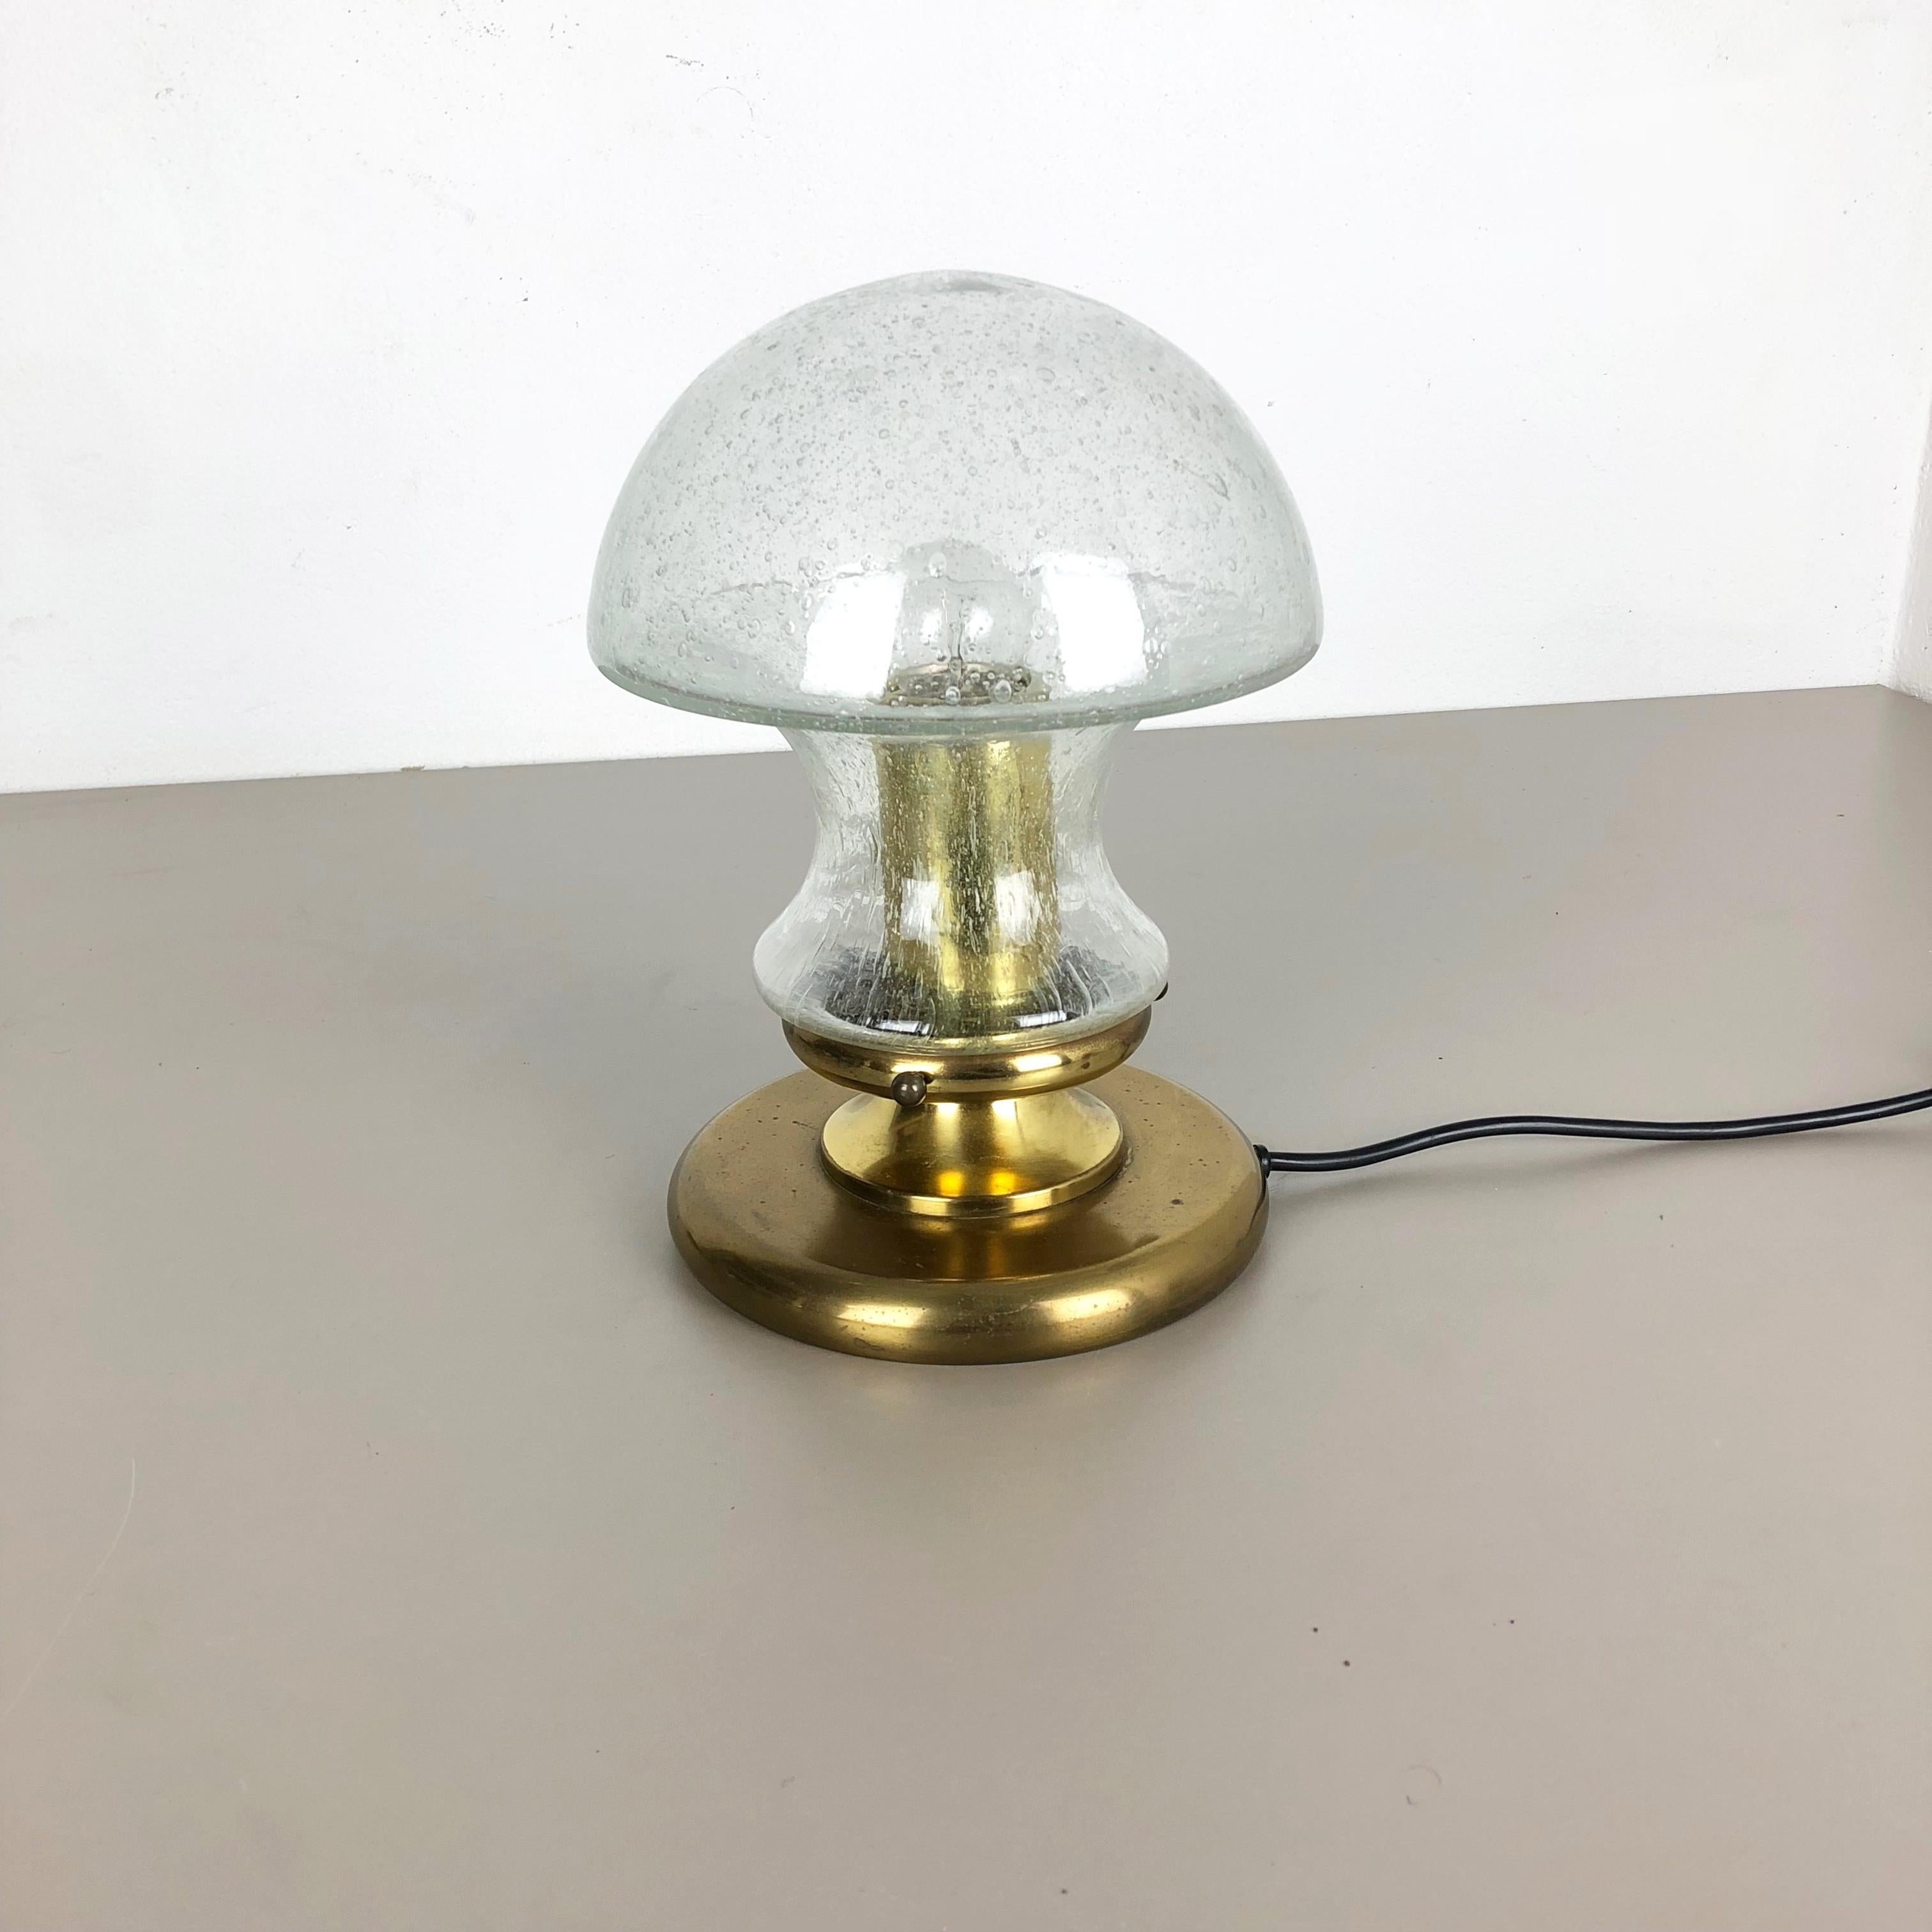 Article:

Table light


Producer:

Doria lights, Germany


Origin:

Germany



Age:

1970s




This 1970s table light was made by Doria lights in Germany. The light base is made of solid metal in brass tone finish, at the top